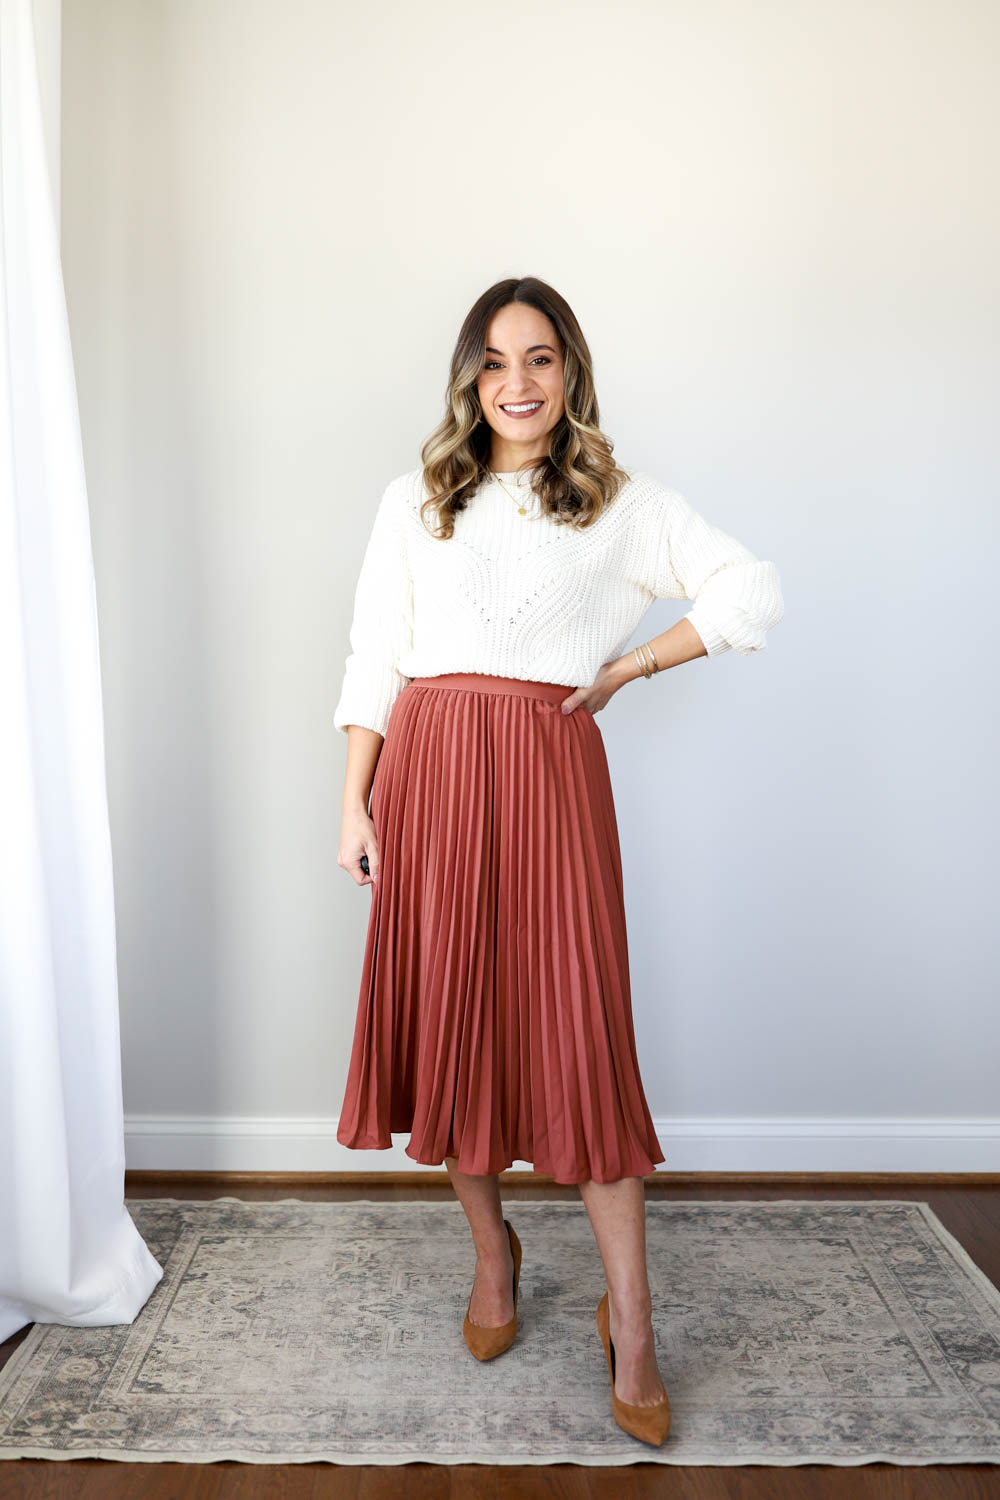 My Favorite Way to Style a Pleated Midi Skirt